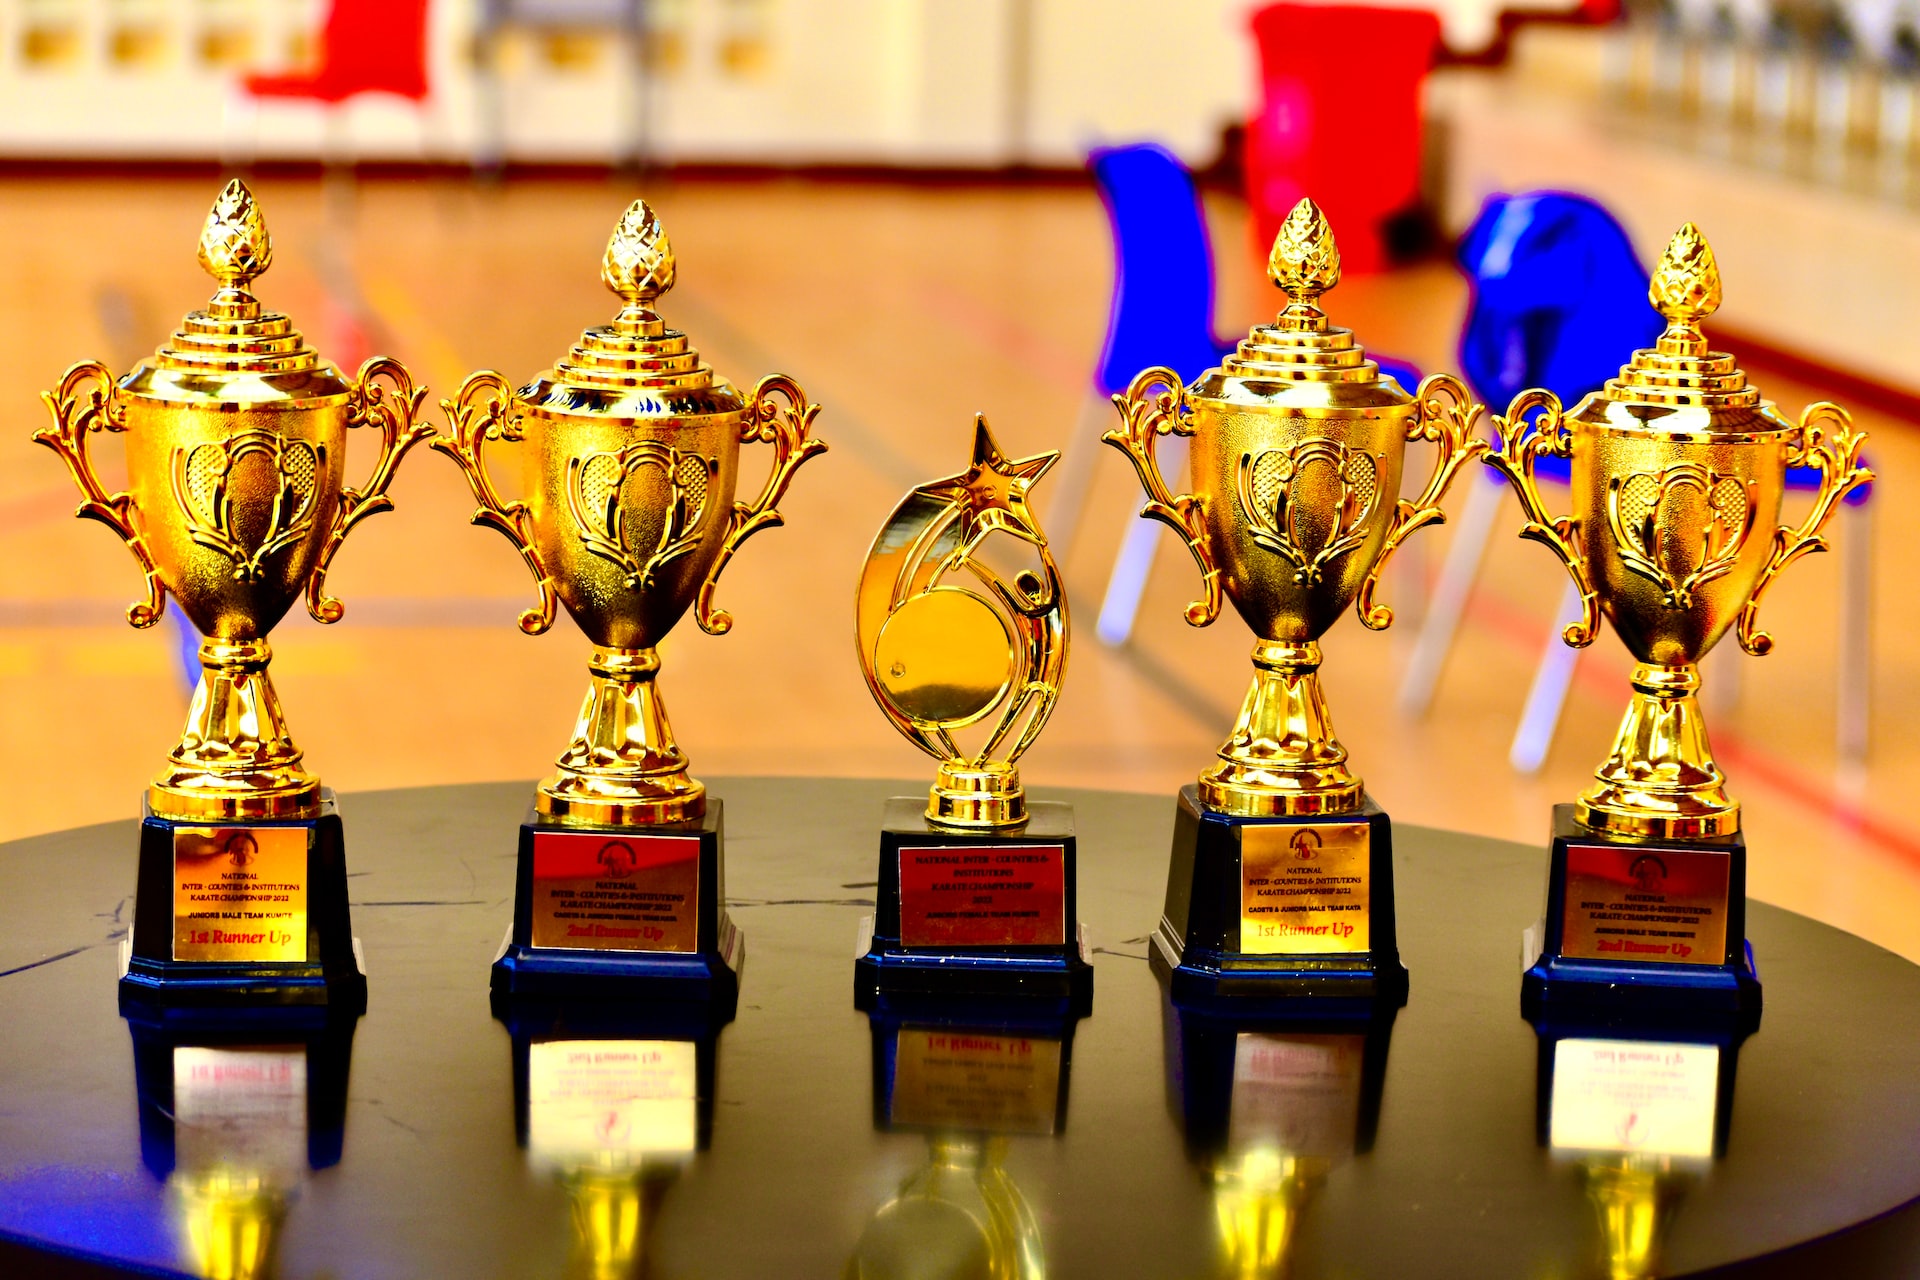 Displaying Custom Trophy Figures in Your Home: Tips and Ideas - Blog